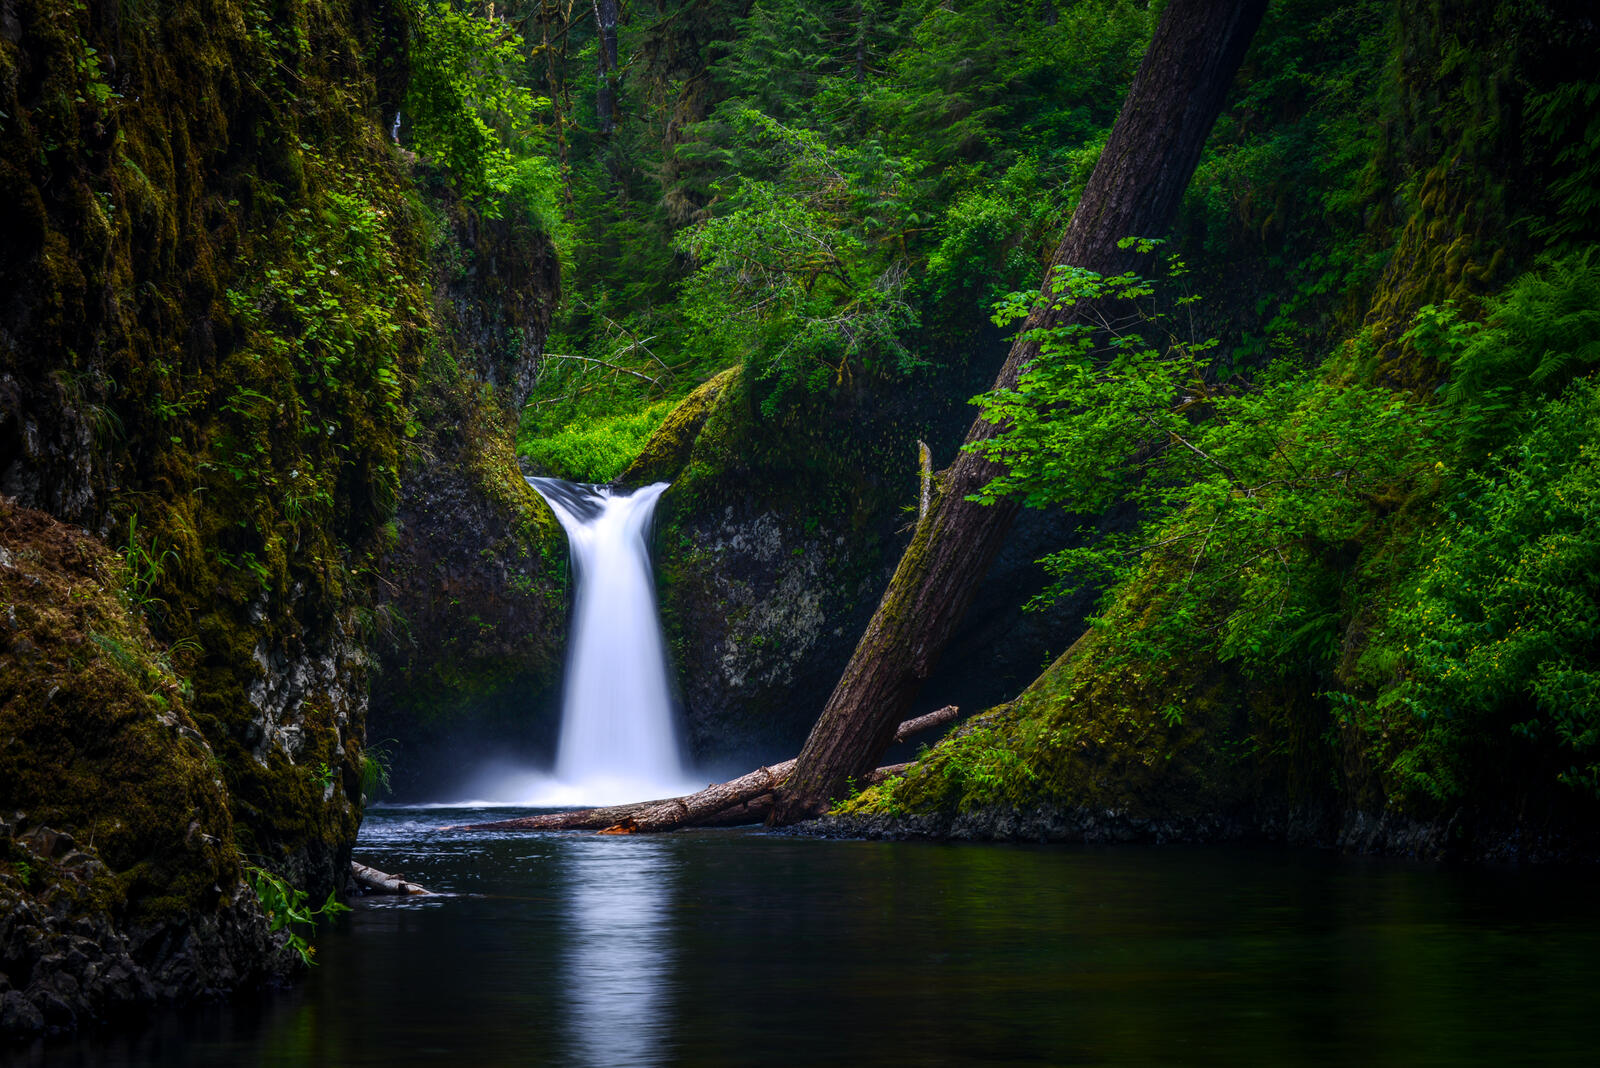 Wallpapers nature Columbia River Gorge Oregon on the desktop